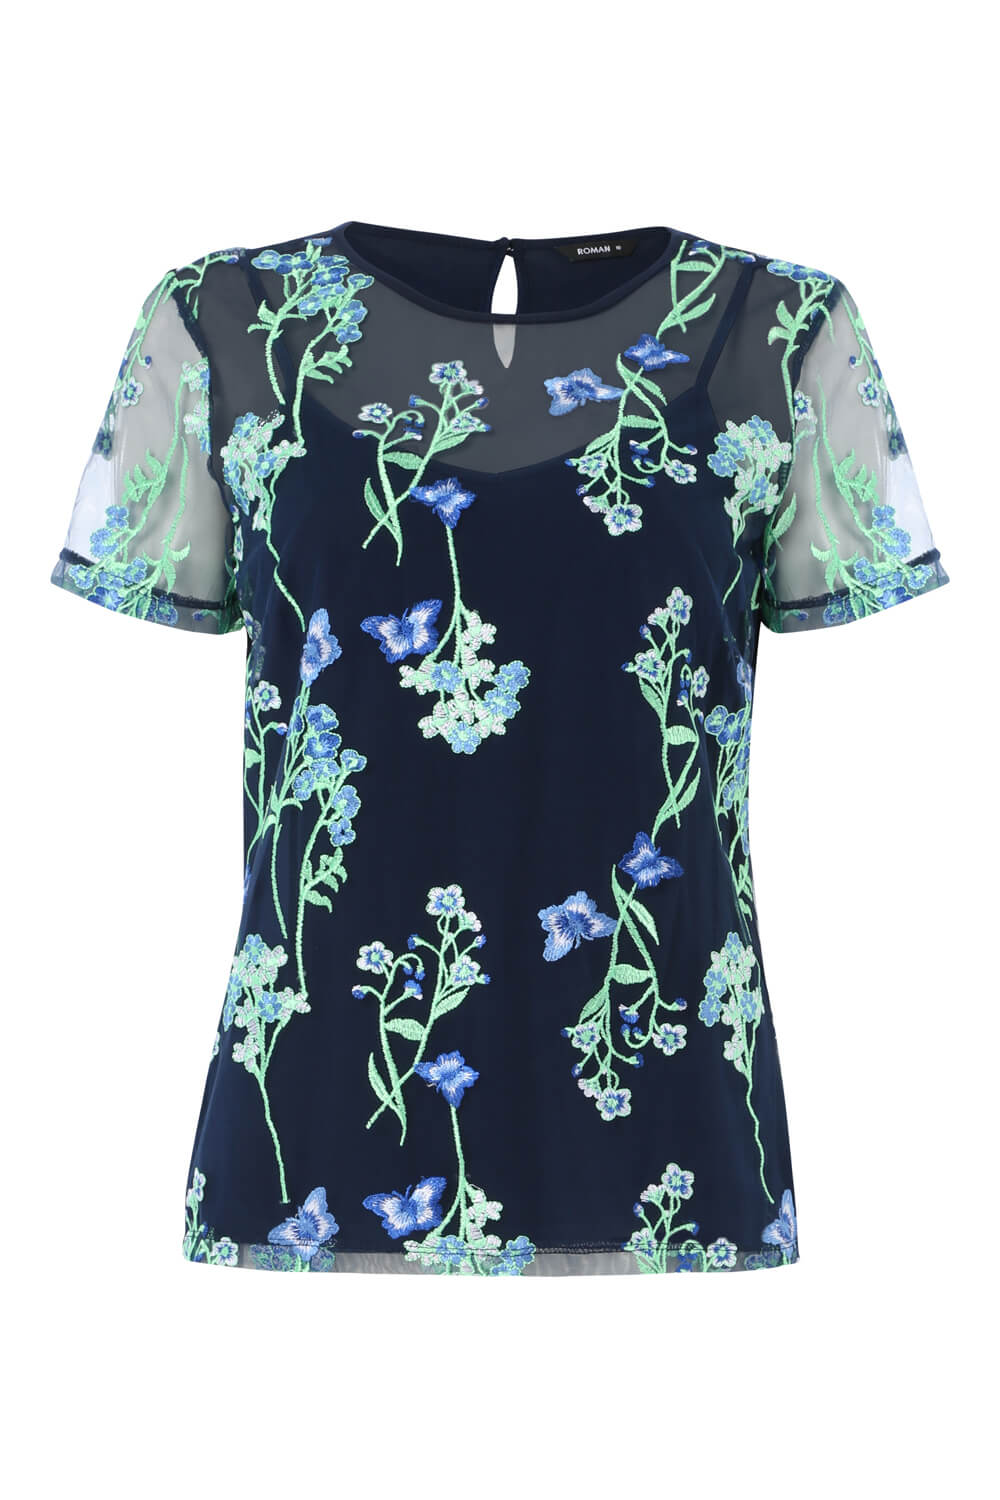 Blue Floral Mesh Embroidered Top, Image 4 of 8